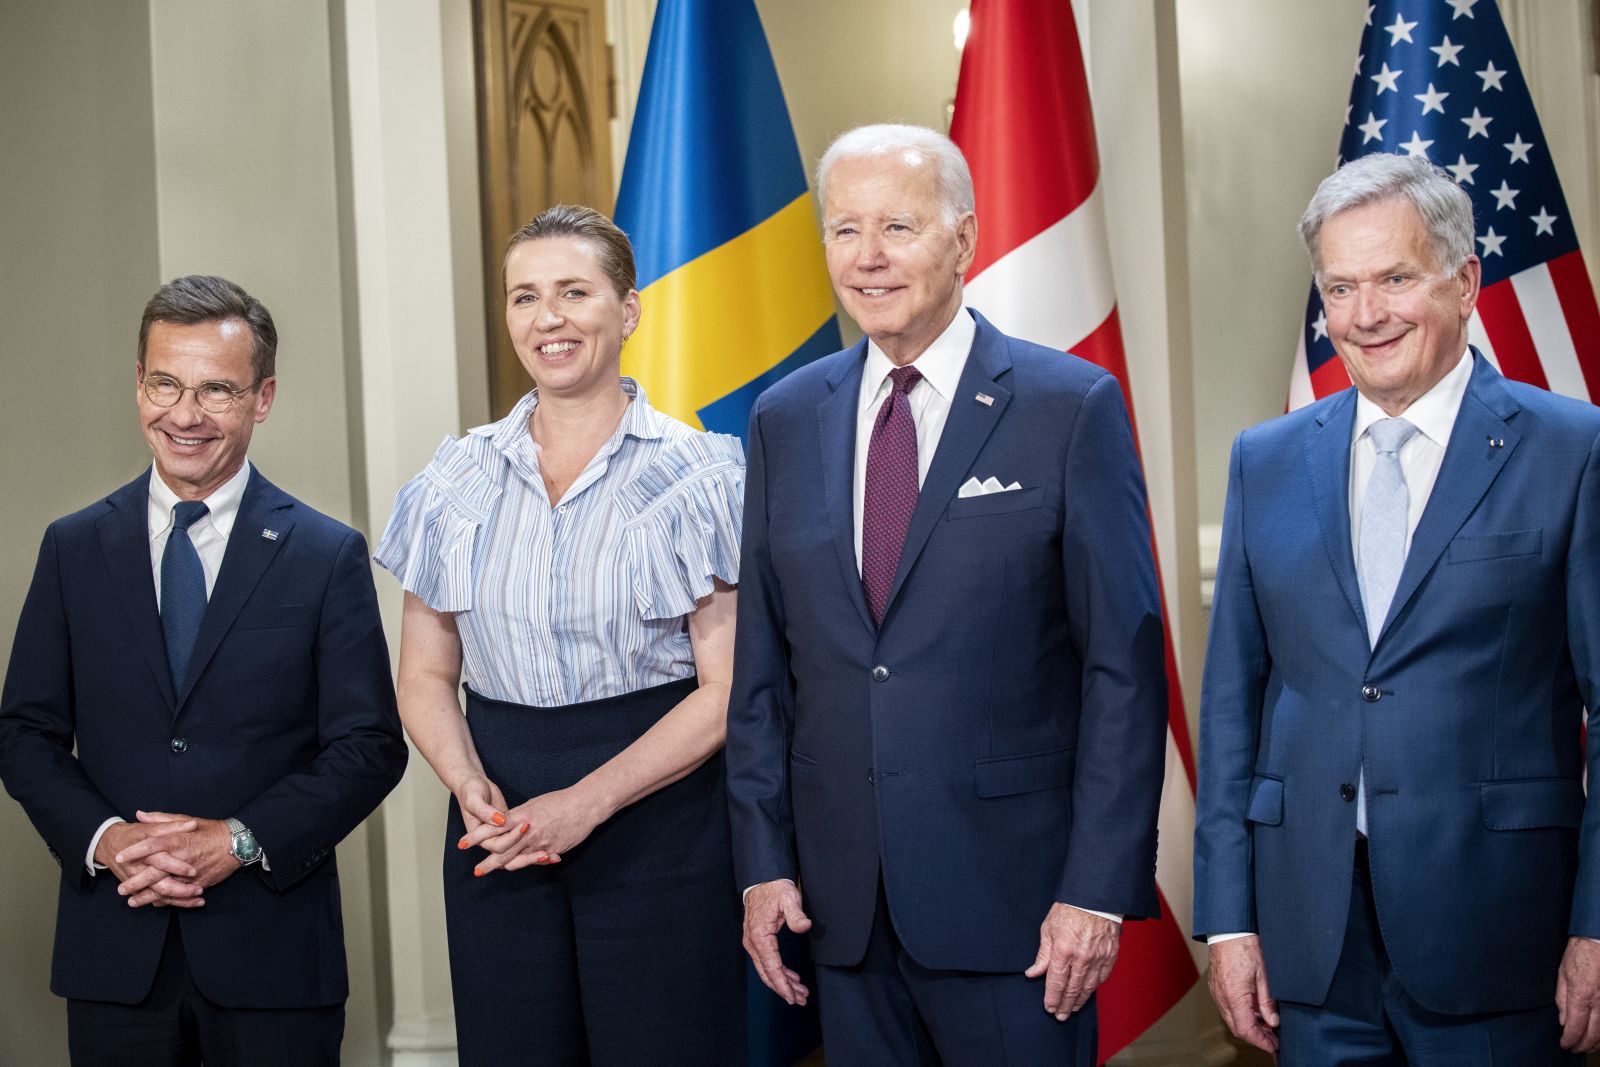 epa10743620 (L-R) Sweden's Prime Minister Ulf Kristersson, Denmark's Prime Minister Mette Frederiksen, US President Joe Biden and Finland's President Sauli Niinisto posing for a family photo during the US-Nordic Leaders' Summit Meeting at the Presidential Palace in Helsinki, Finland, 13 July 2023. The summit will see leaders of the USA, Finland, Sweden, Norway, Denmark and Iceland holding discussions on closer cooperation between the Nordic countries and the United States on security, environment and technology issues.  EPA/IDA MARIE ODGAARD  DENMARK OUT